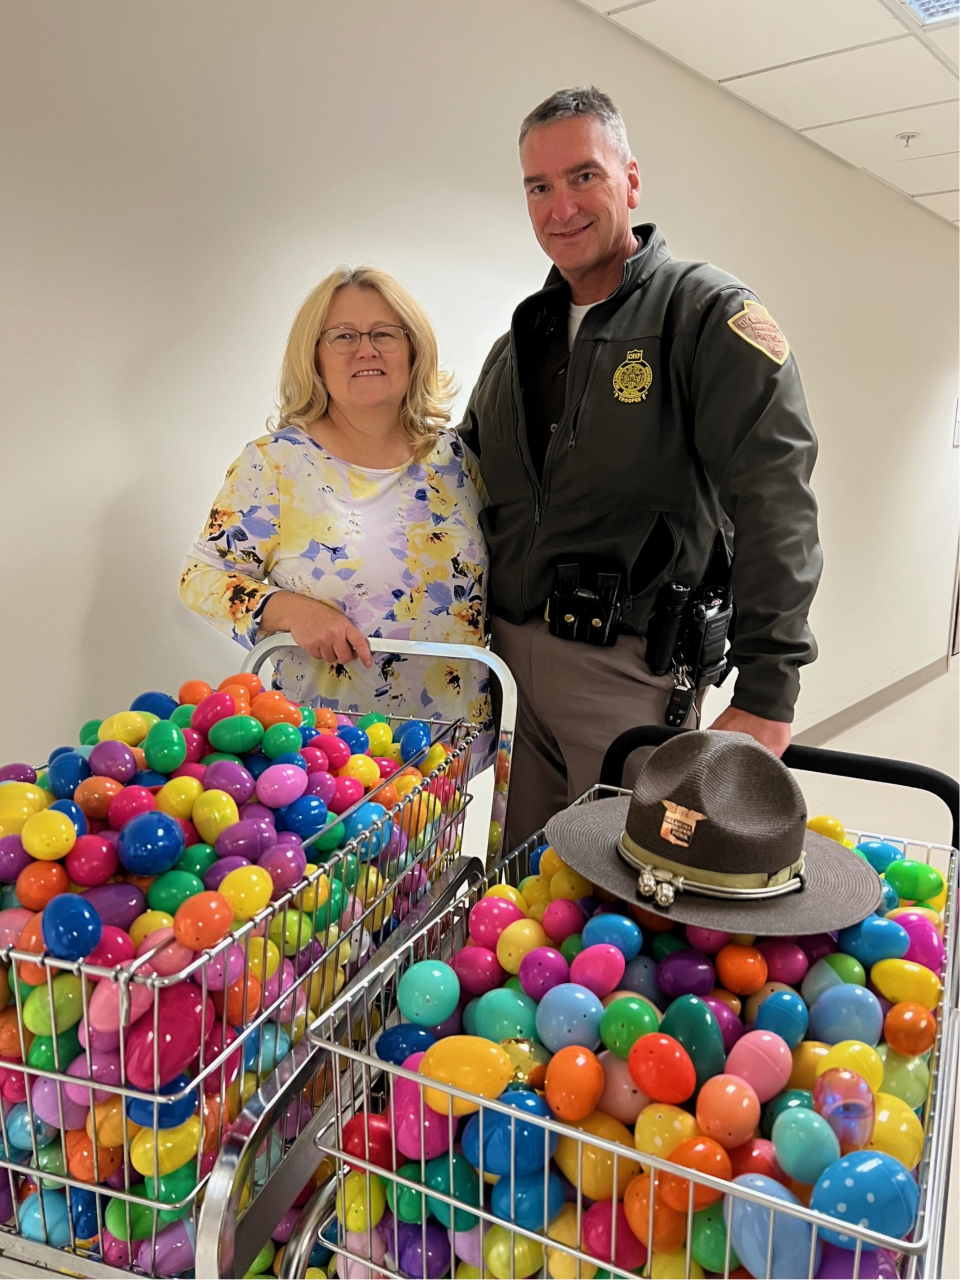 Lisa Whiteman and OHP trooper delivering Easter eggs.